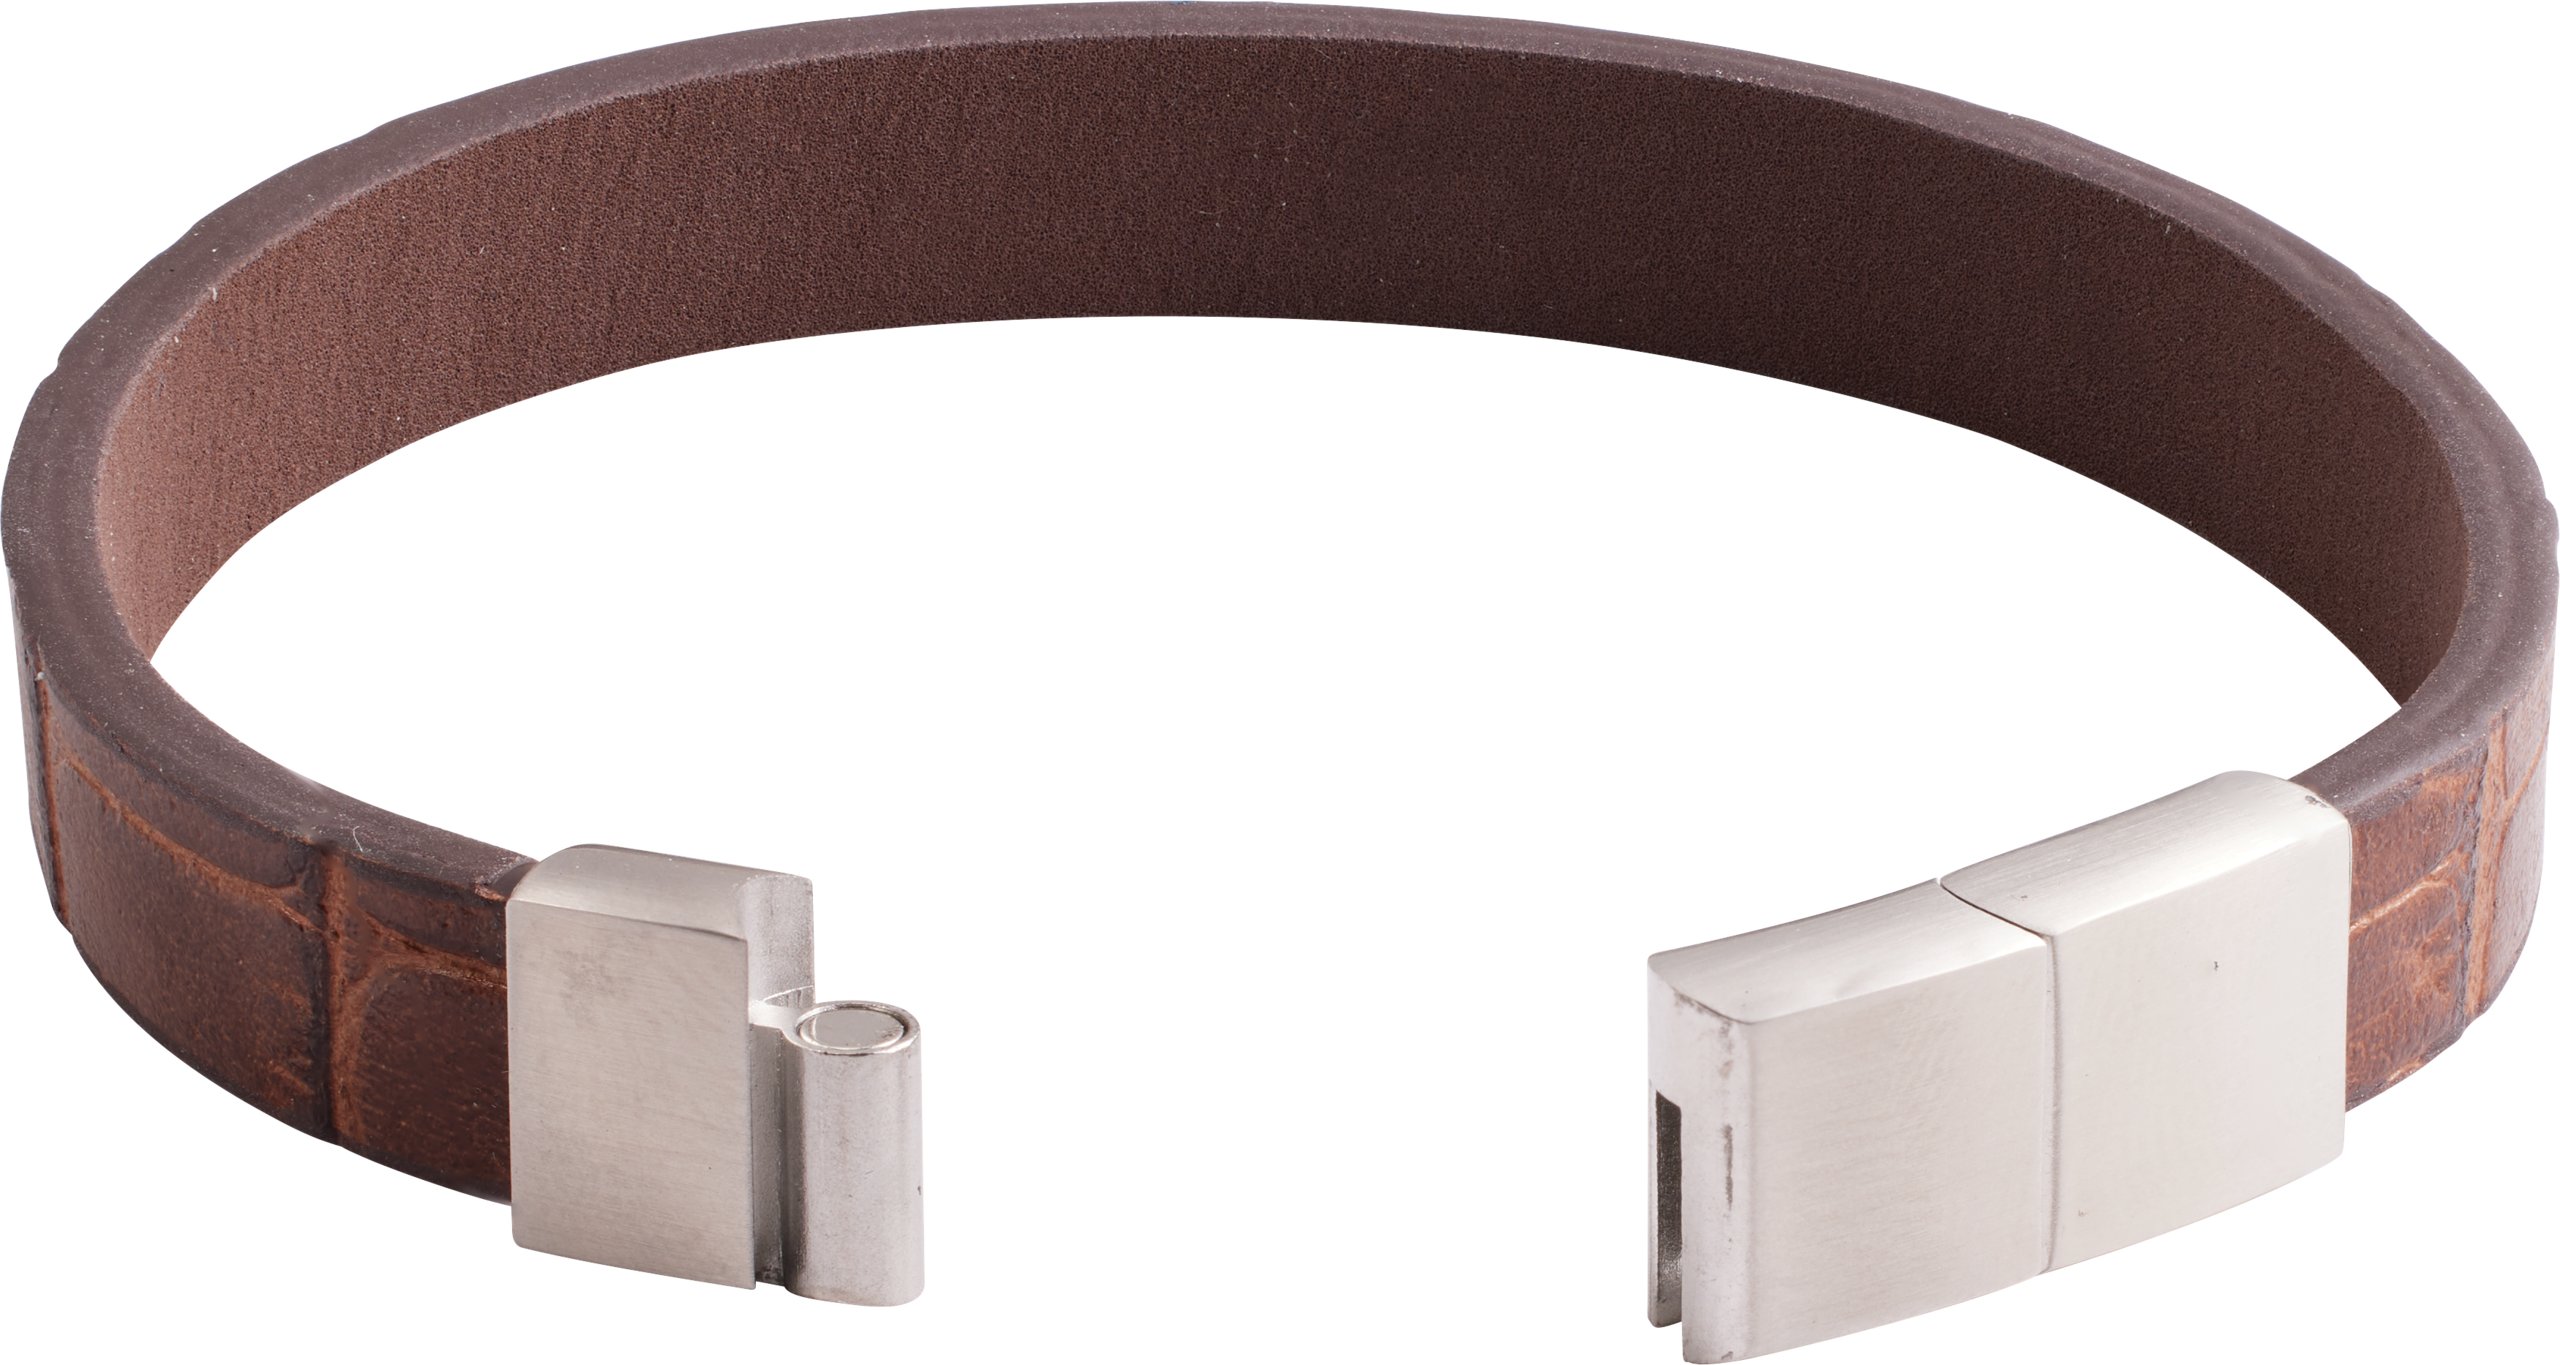 Stainless Steel 11 mm Brown Leather 9 Bracelet